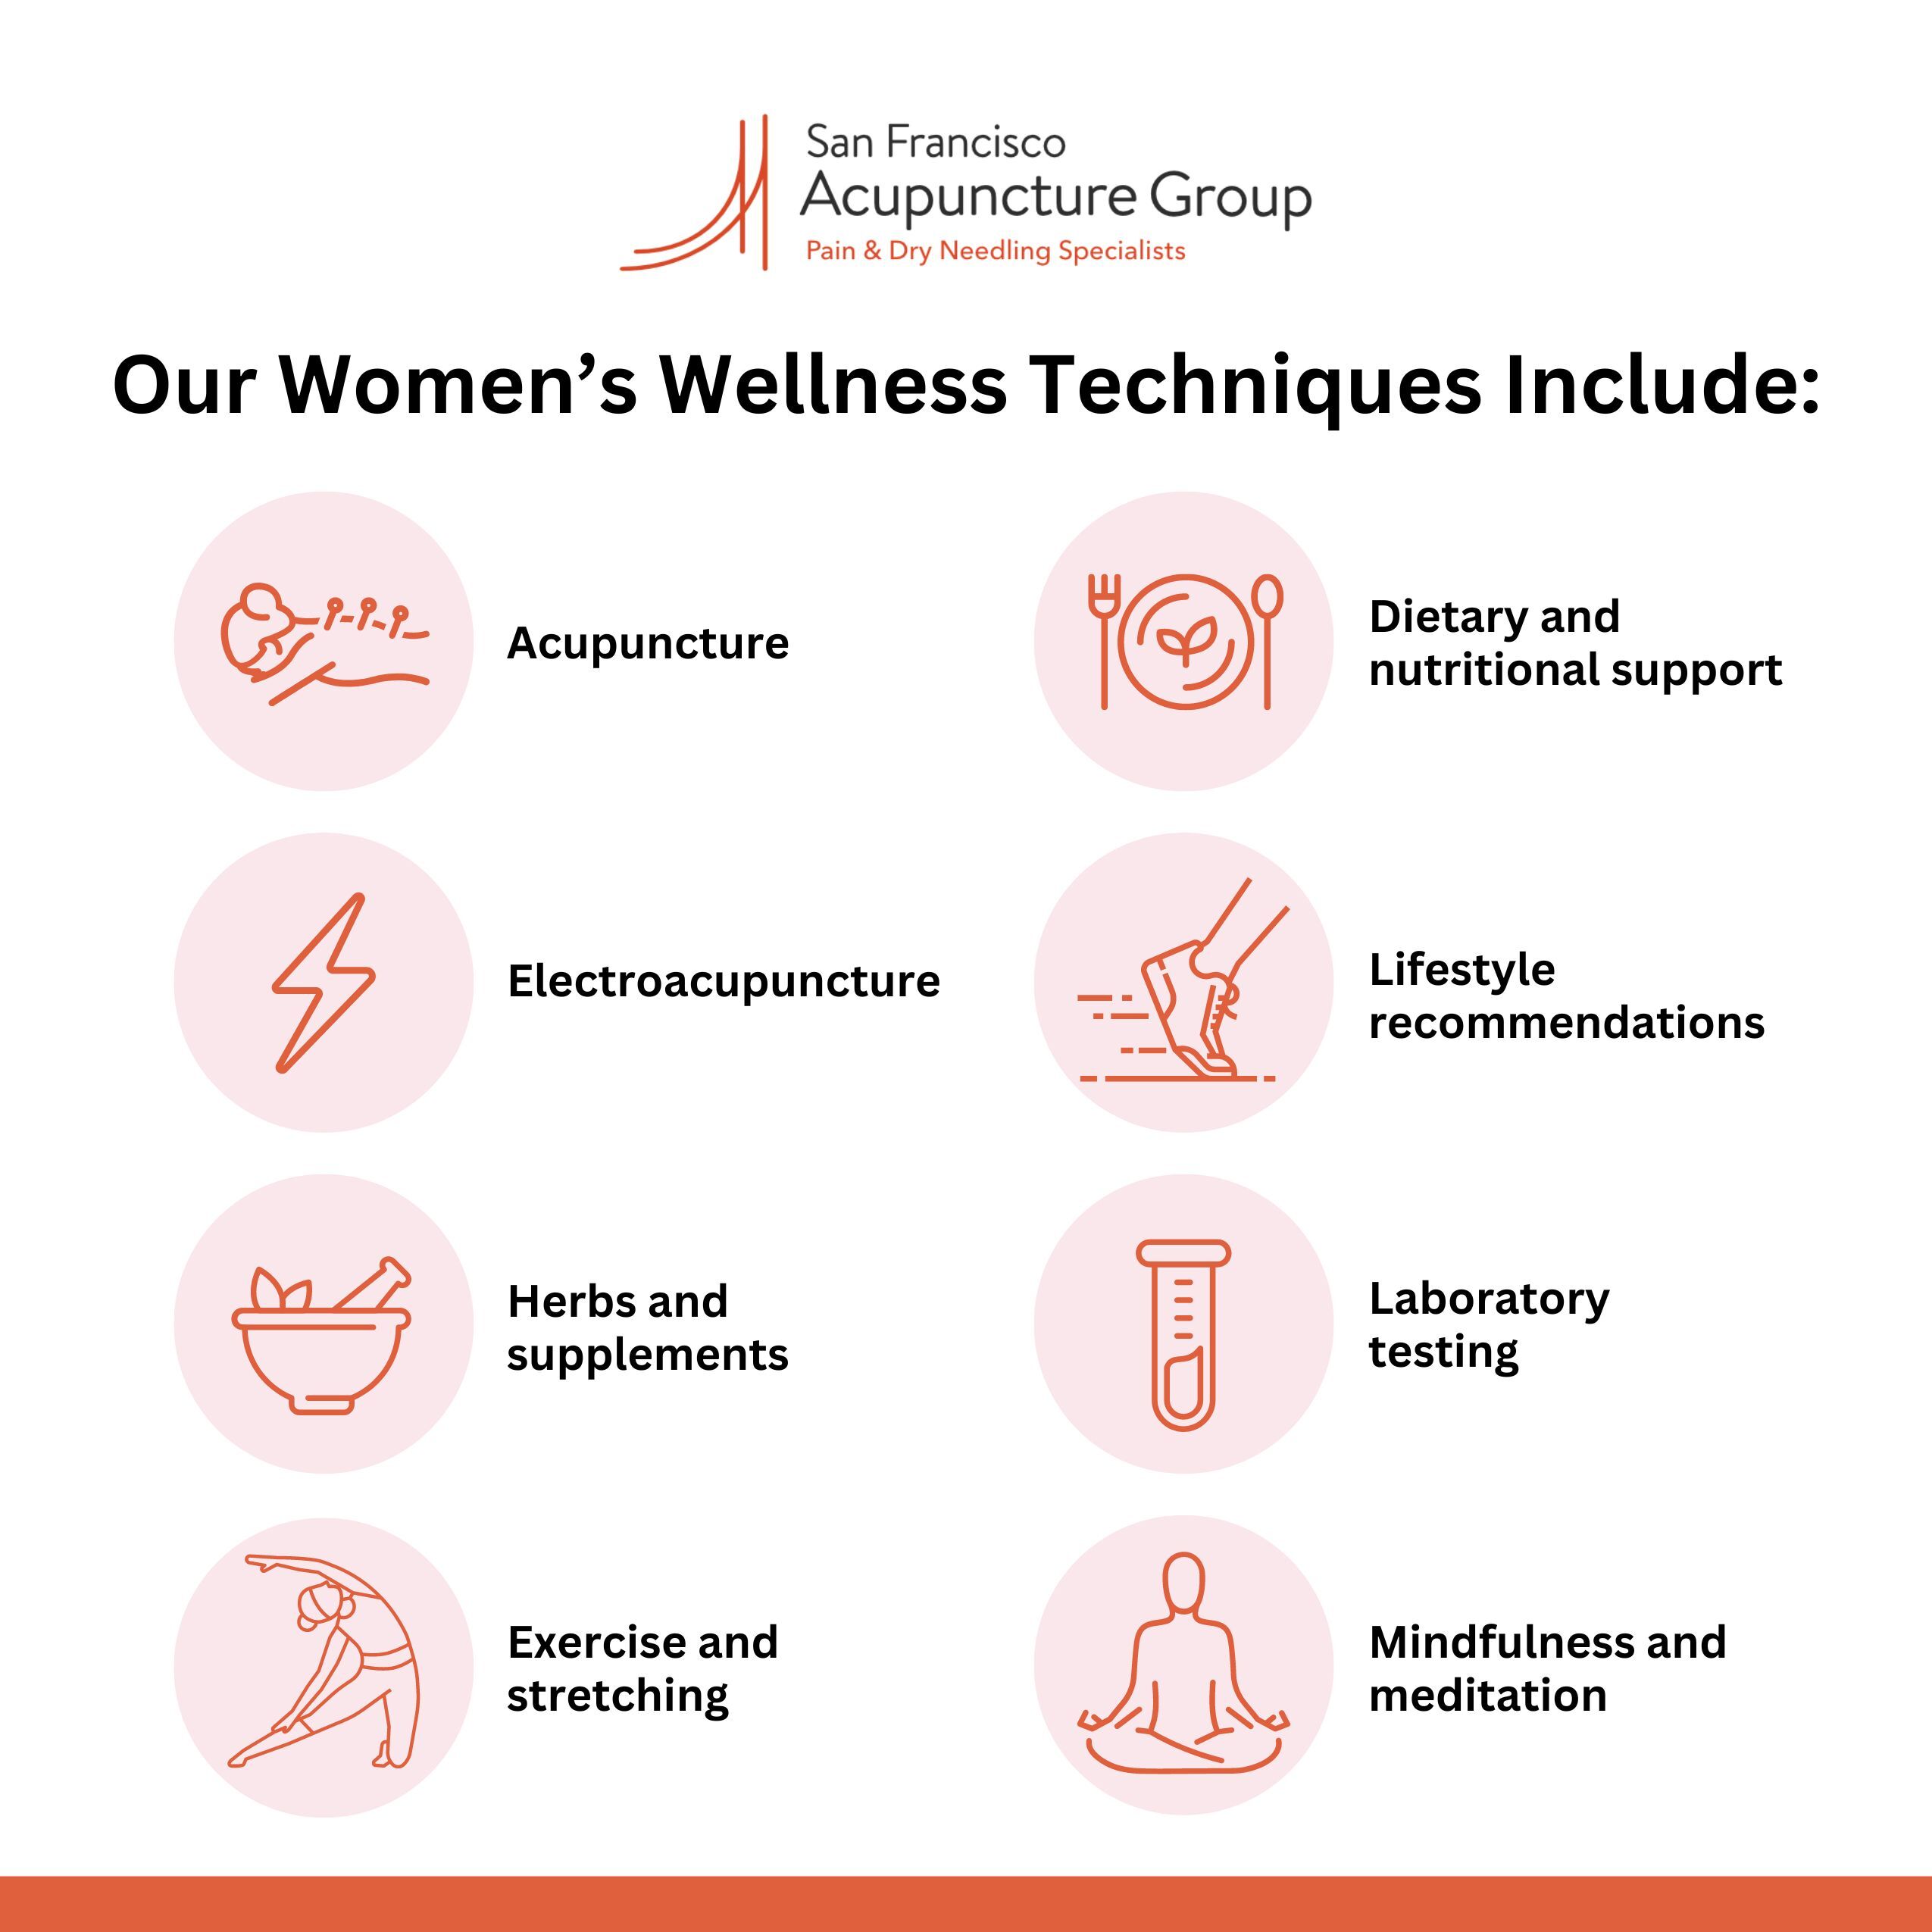 Infographic depicting list of women's wellness techniques: acupuncture; electroacupuncture; exercise and stretching; herbs & supplements; dietary and nutritional support; lifestyle recommendations; laboratory testing; mindfulness & meditation.